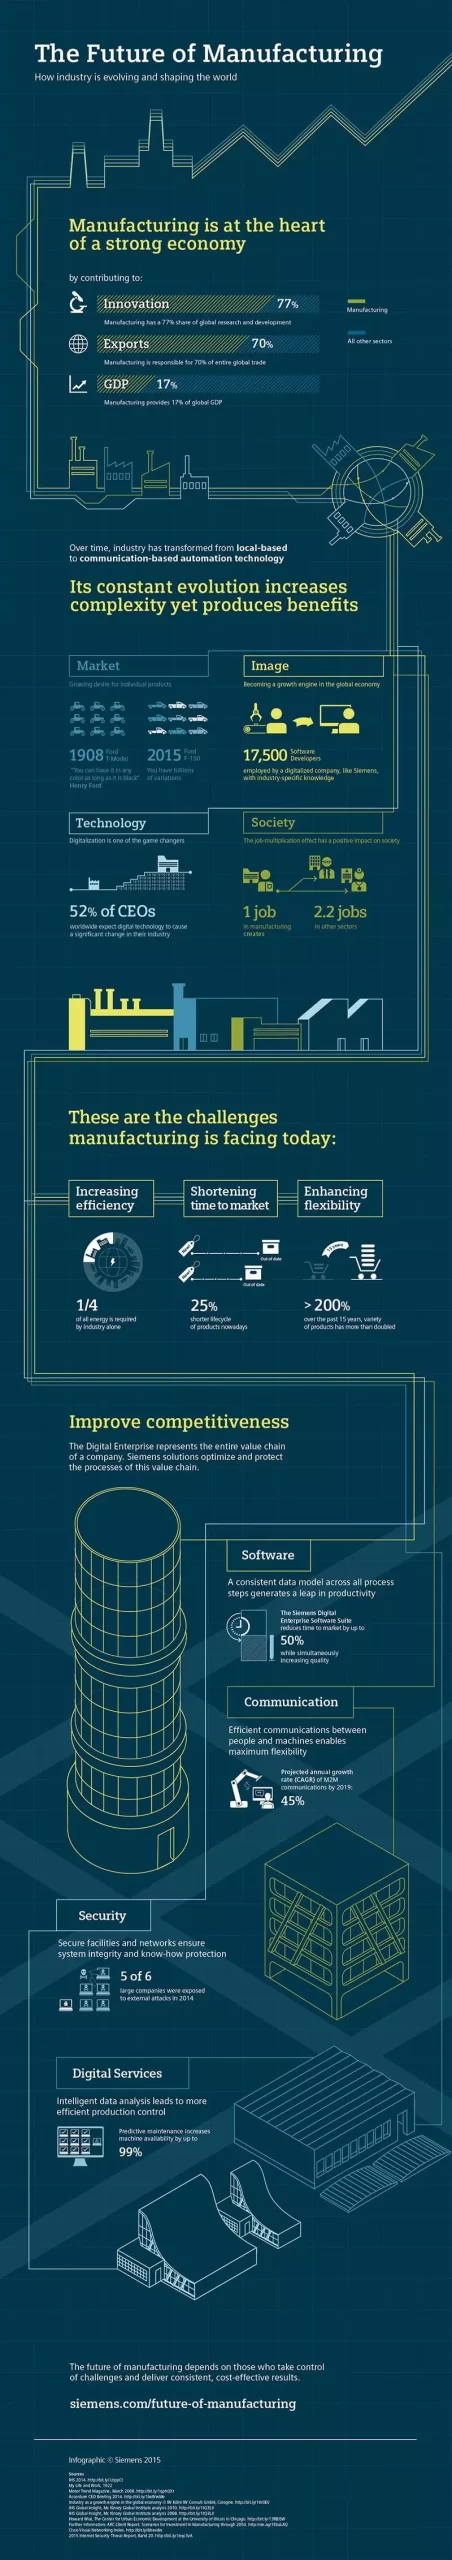 future-of-manufacturing-infographic-scaled.webp